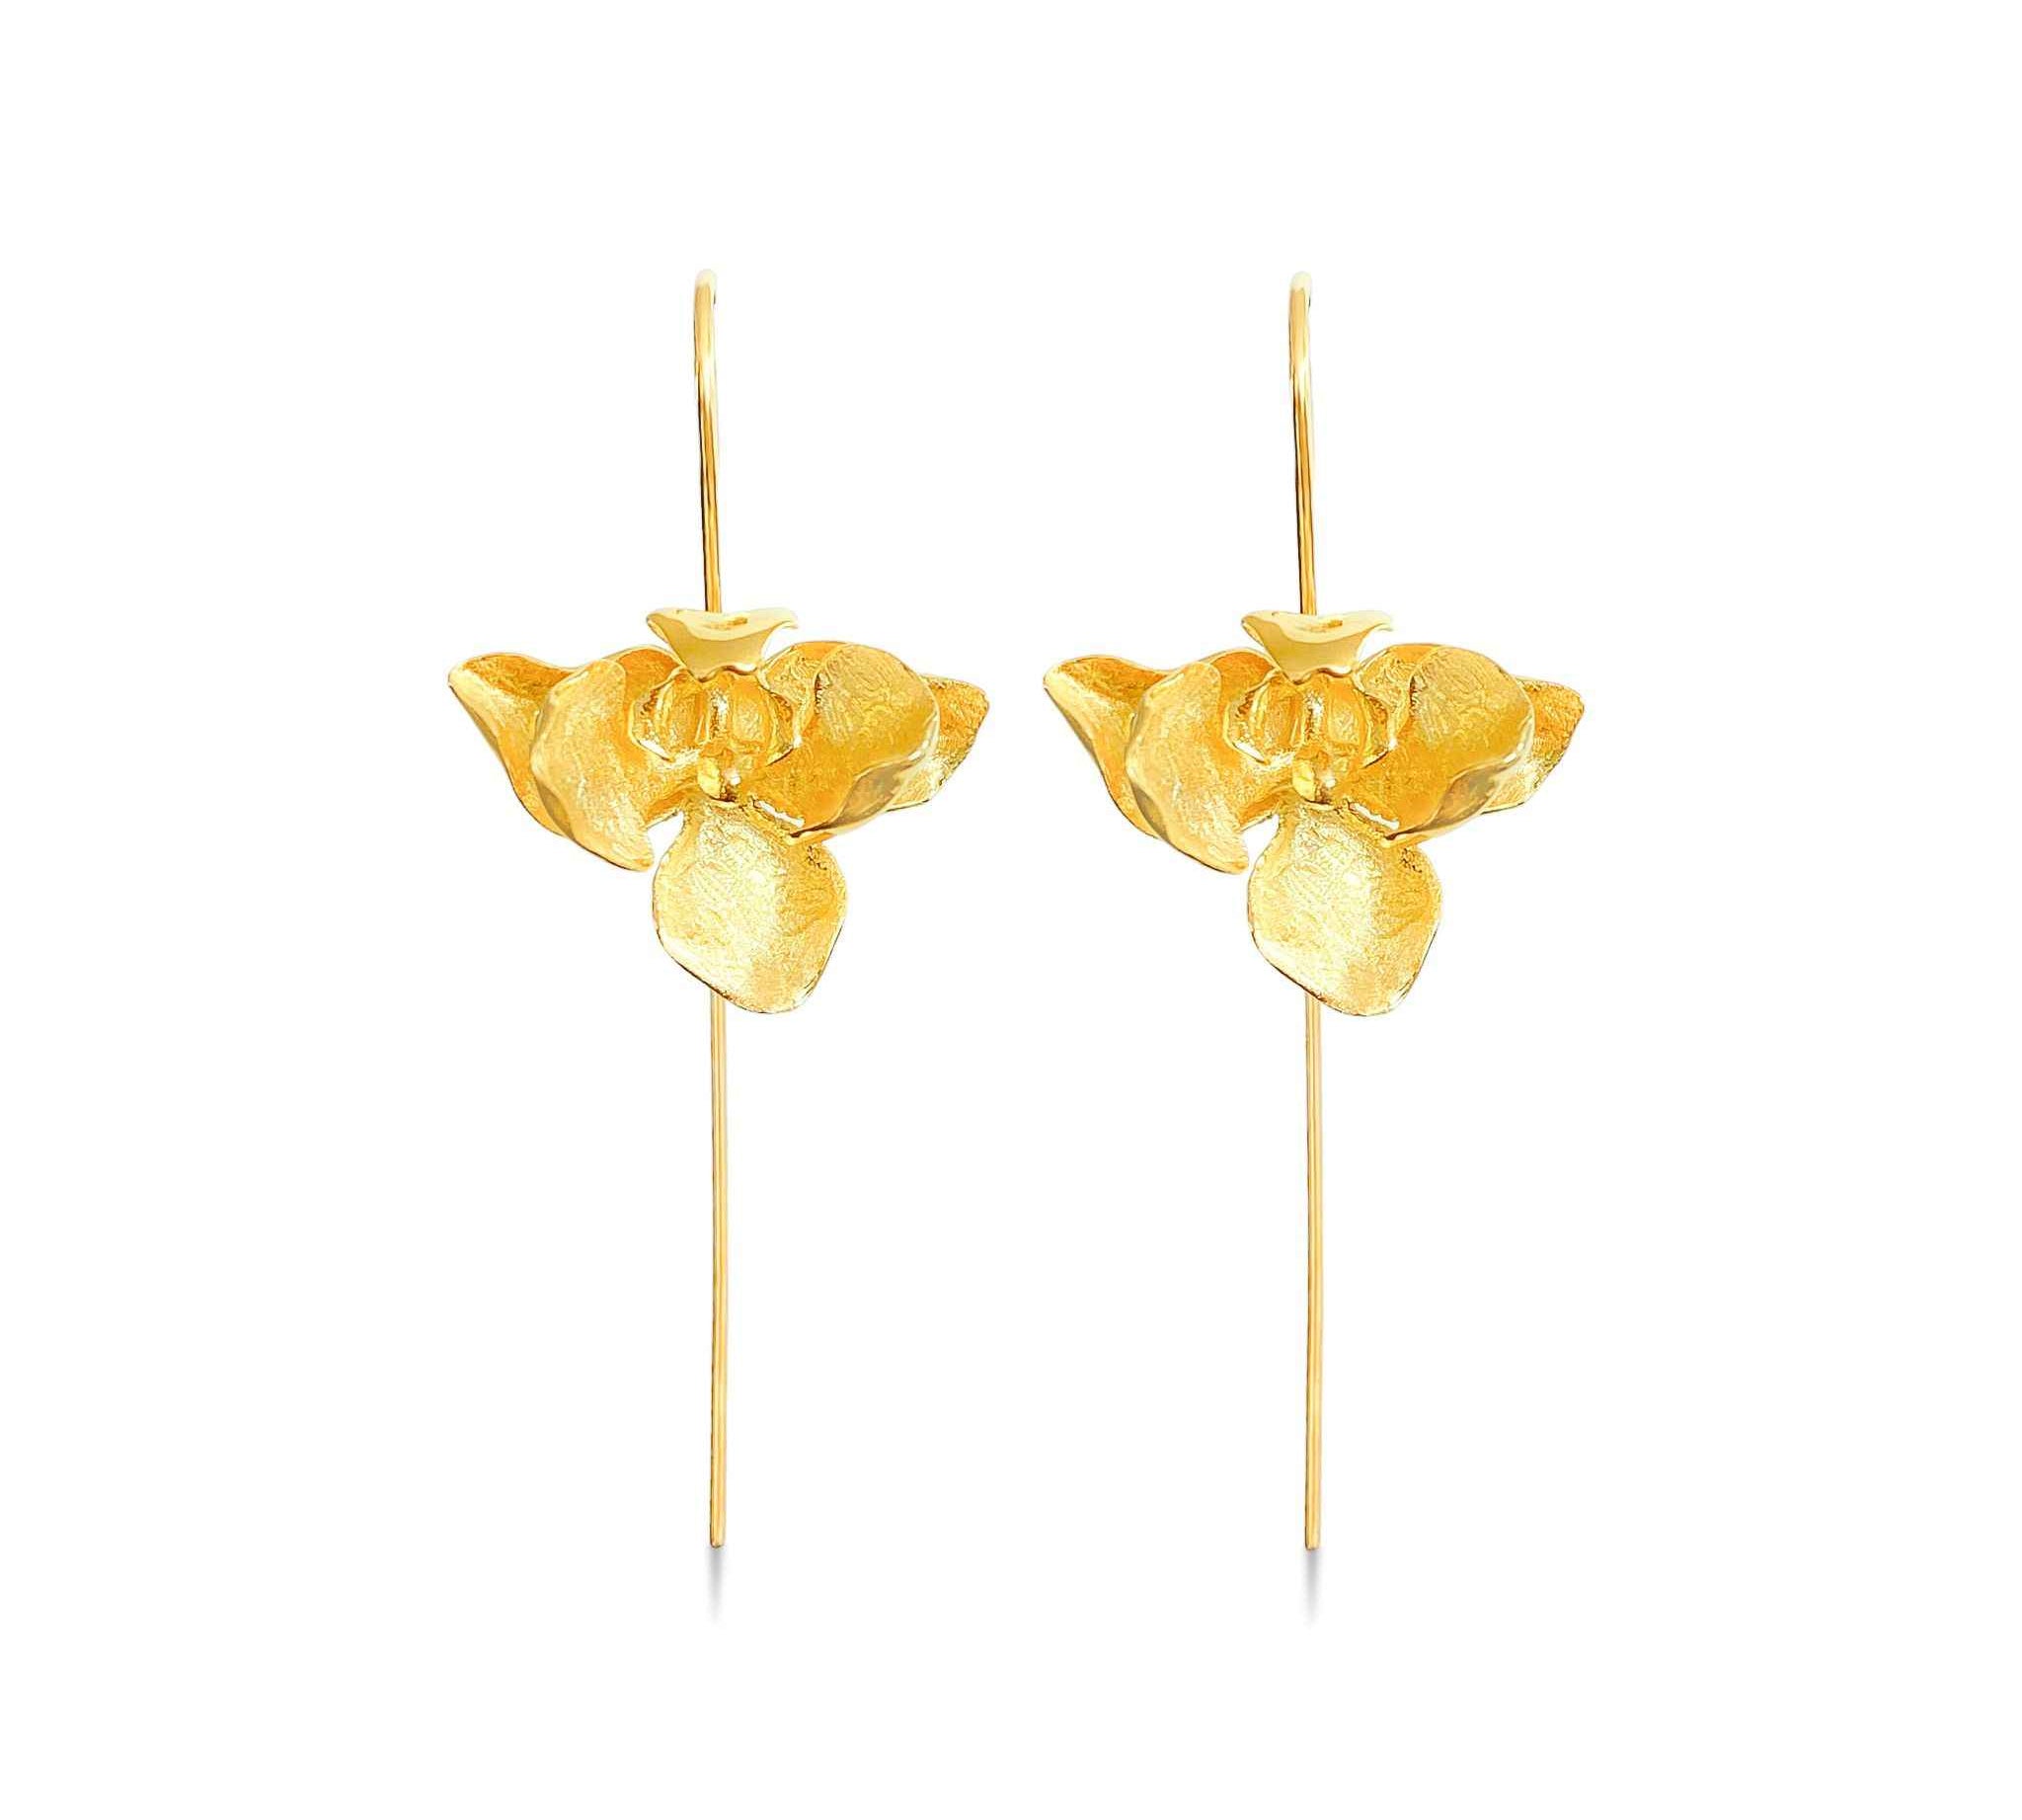 Elegant Women's Orchid Drop Earrings in Gold, handcrafted with sterling silver and plated with 18k gold.  